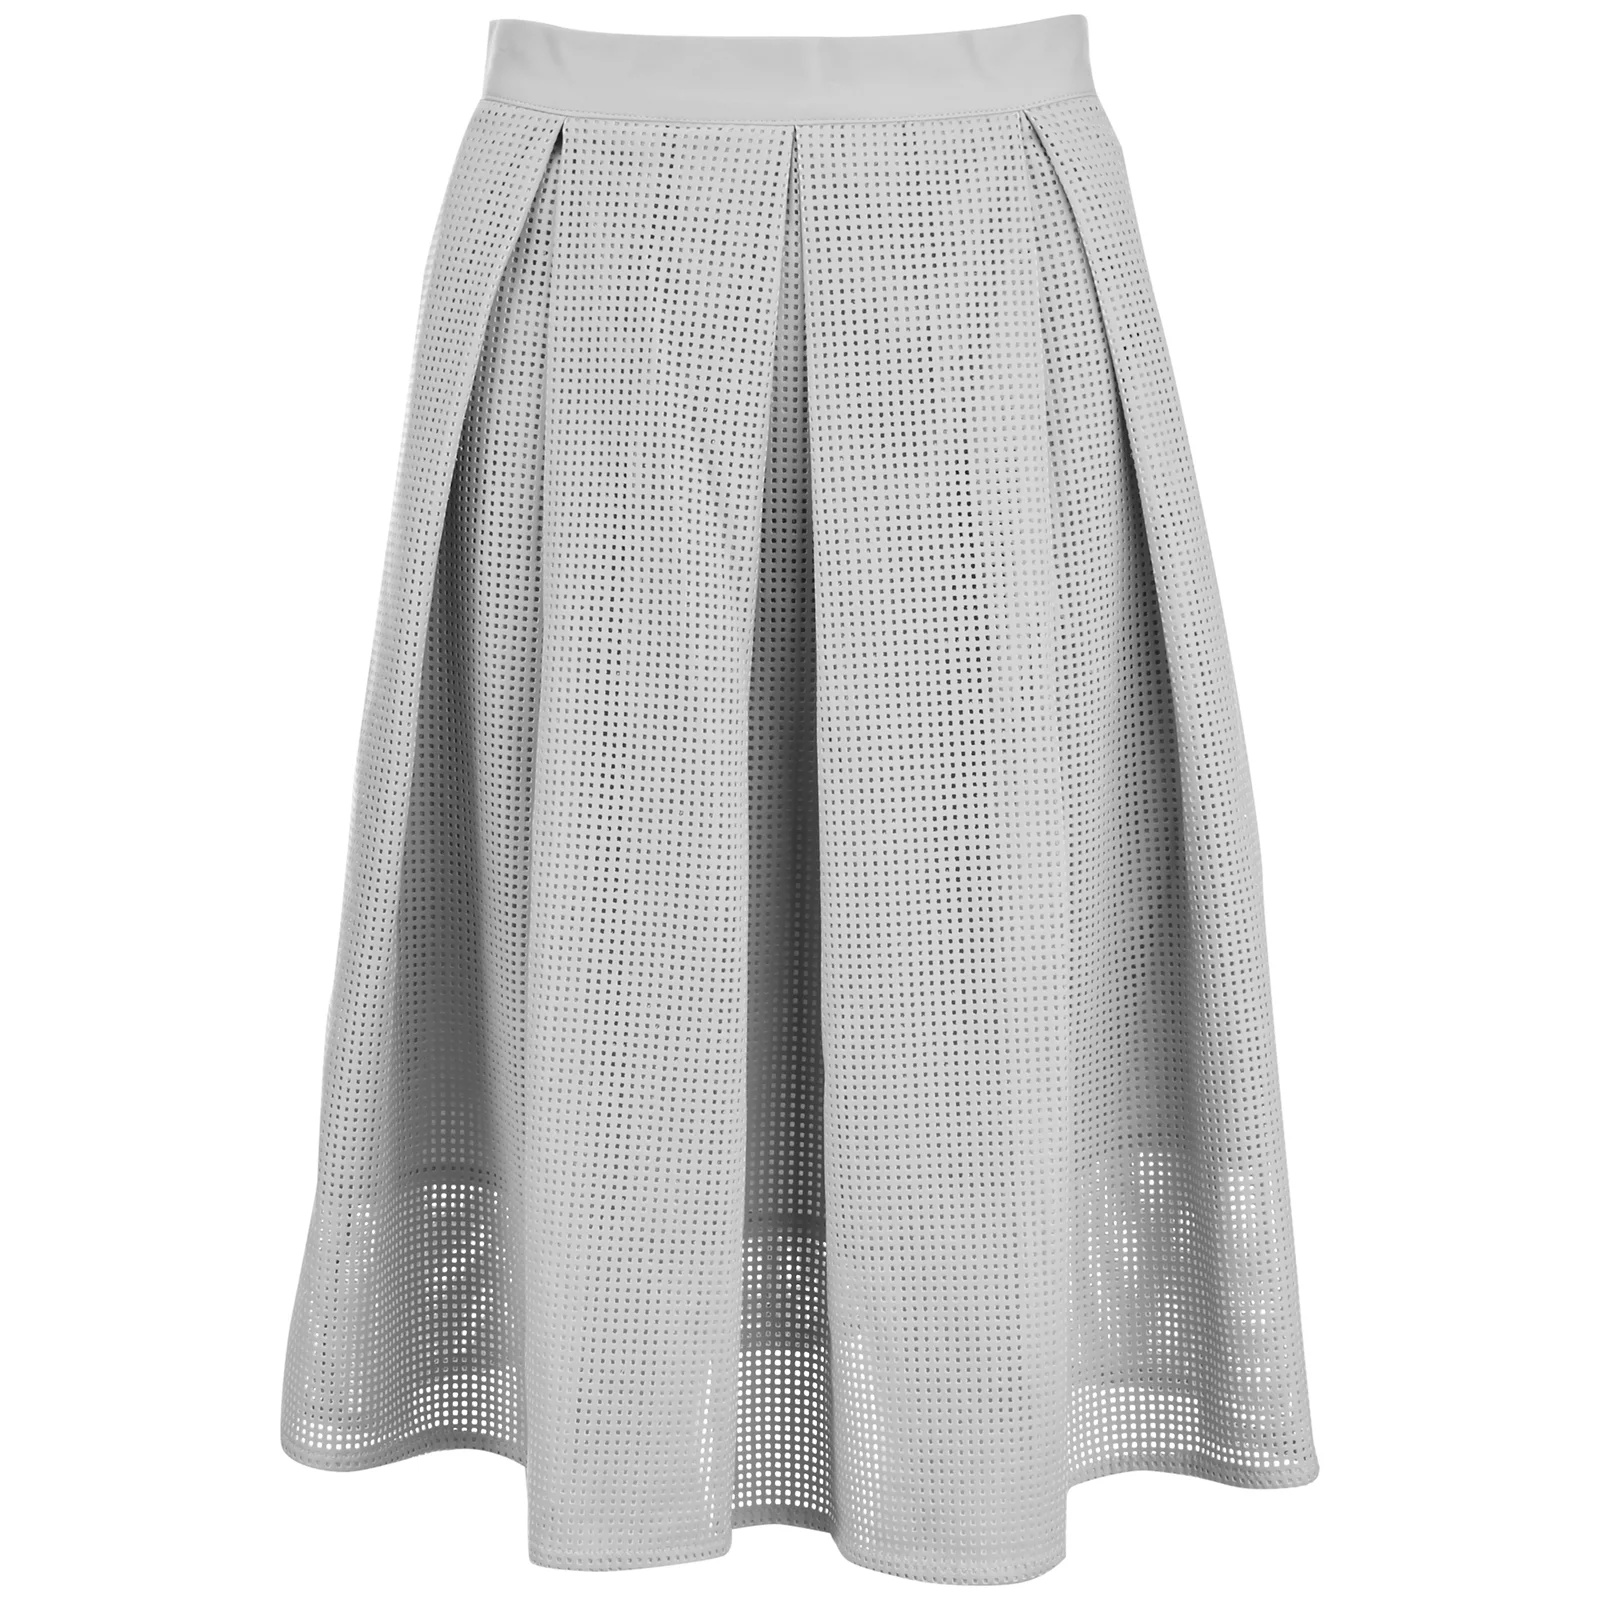 Great Plains Women's Square Route PU Skirt - Grey Image 1